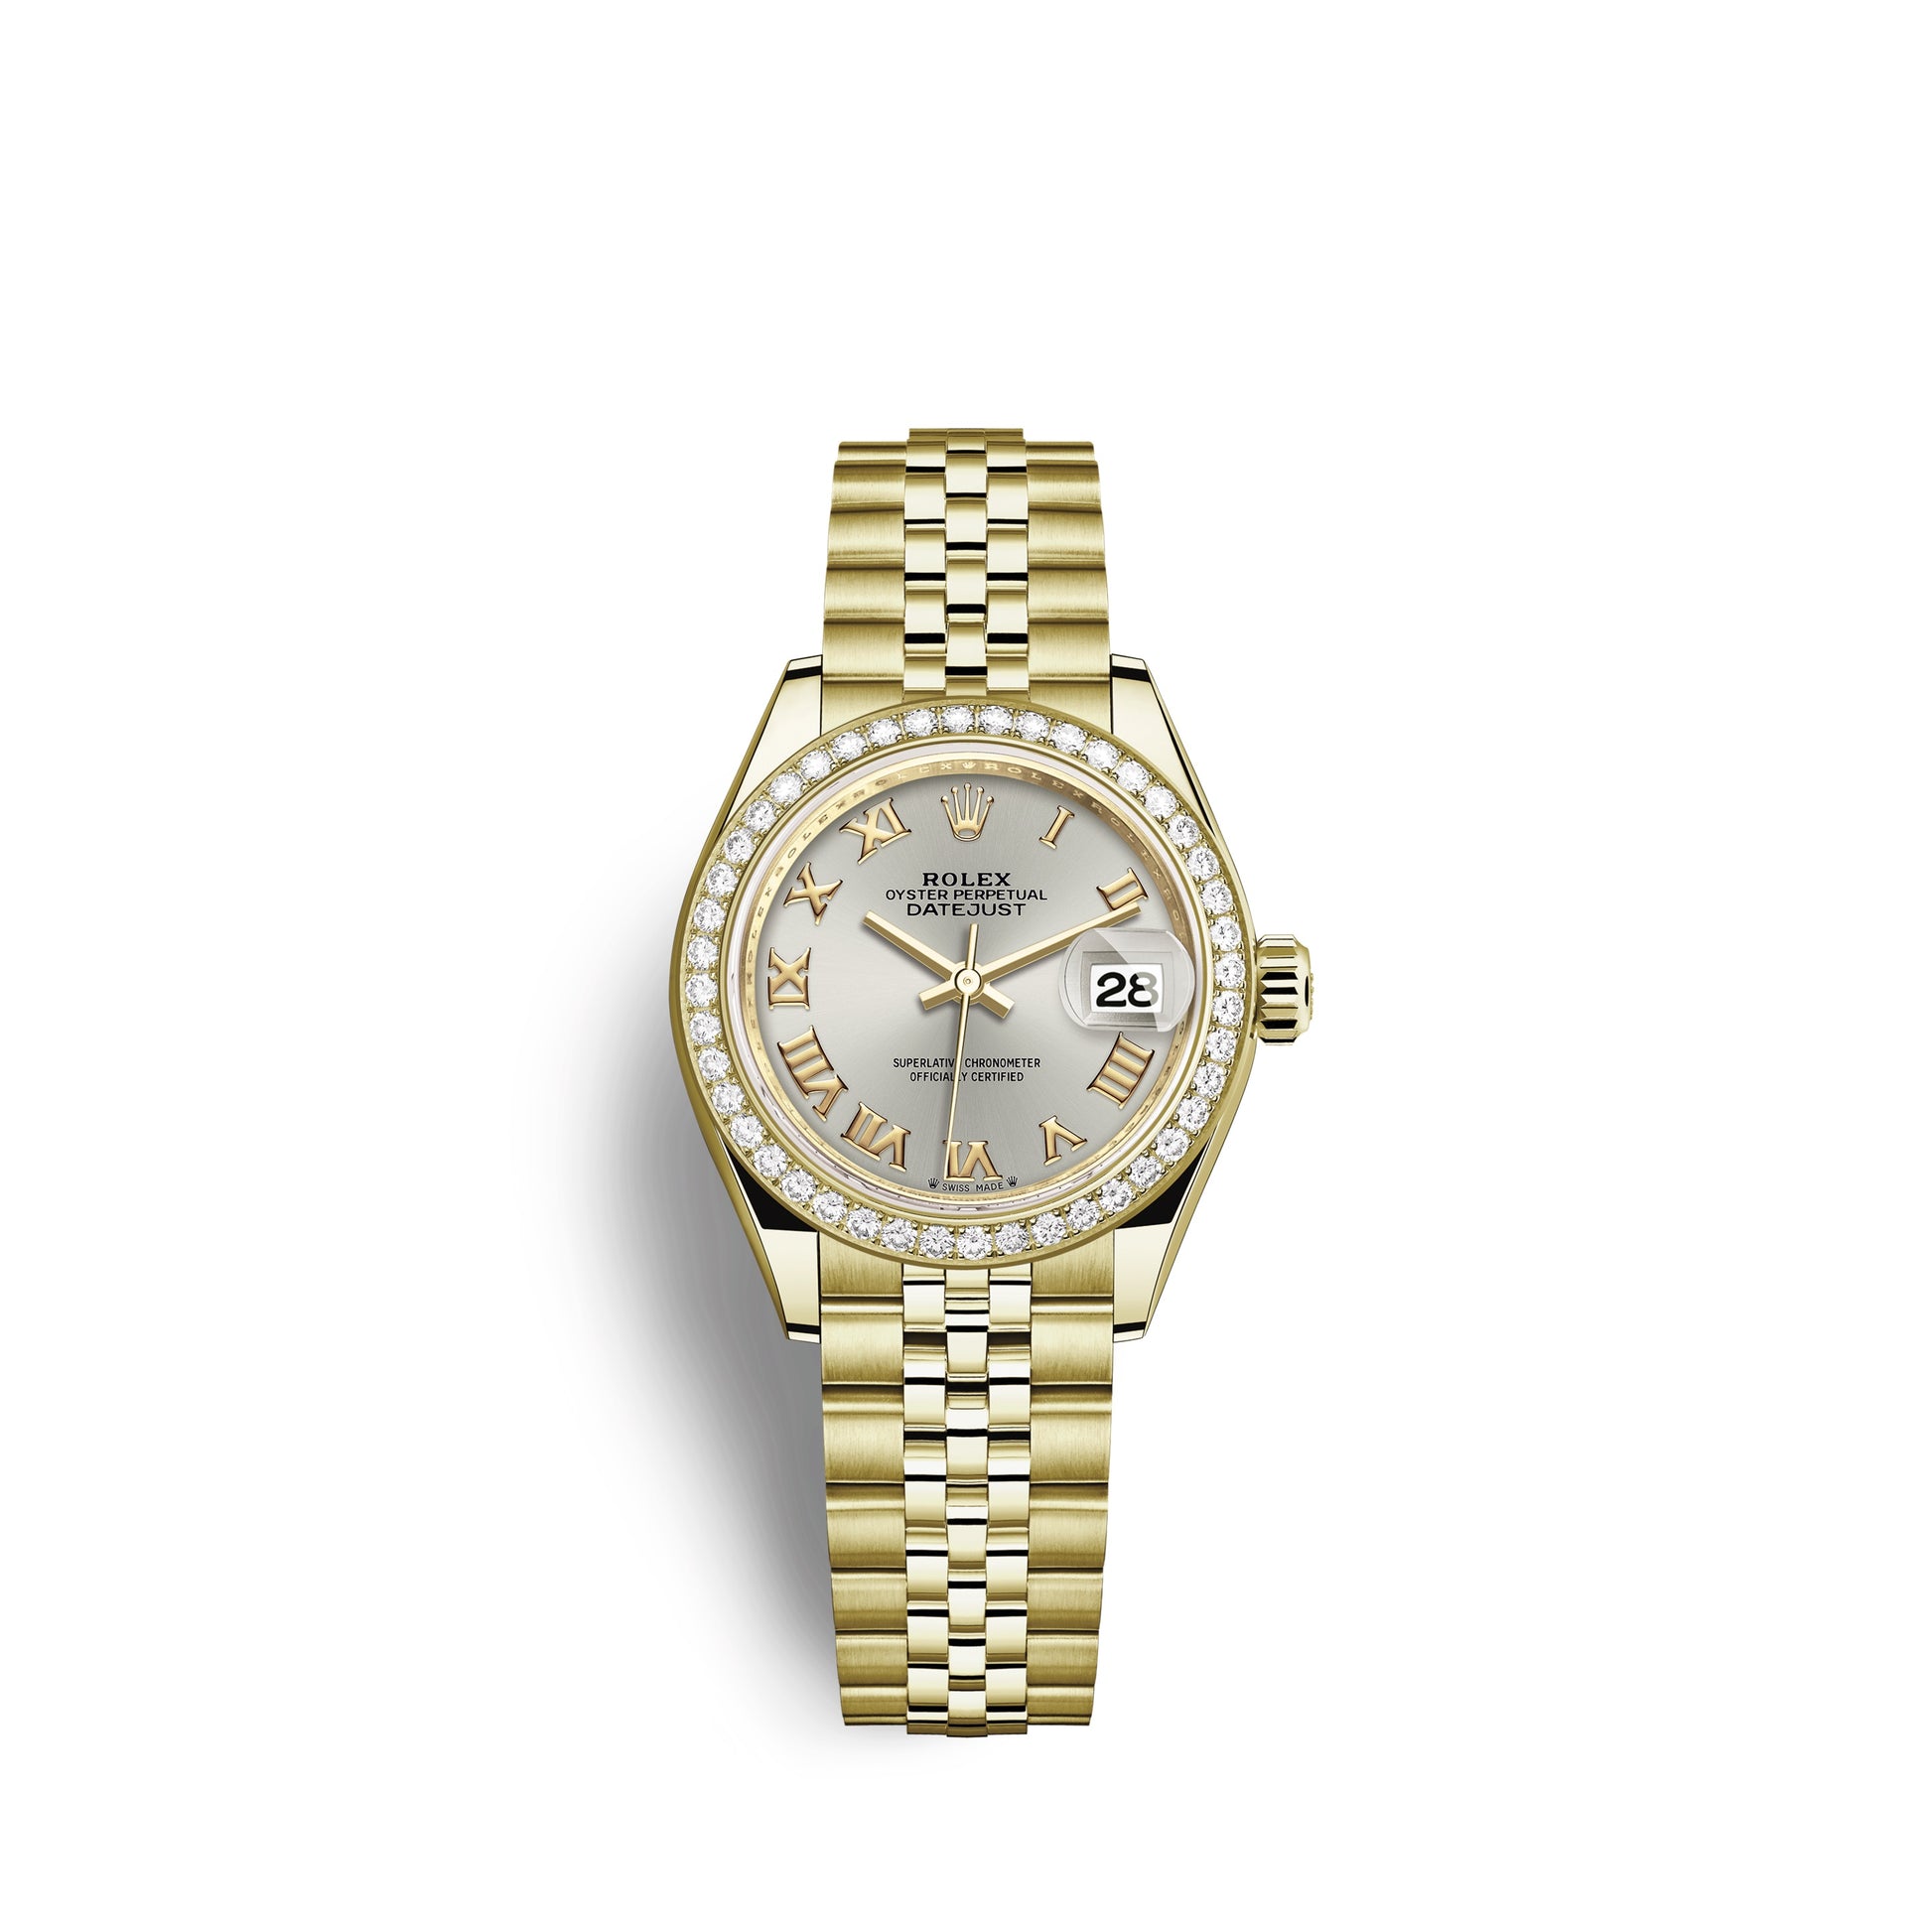 Rolex Lady-Datejust 28, 18kt Yellow Gold and diamonds, Ref# 279138RBR-0018